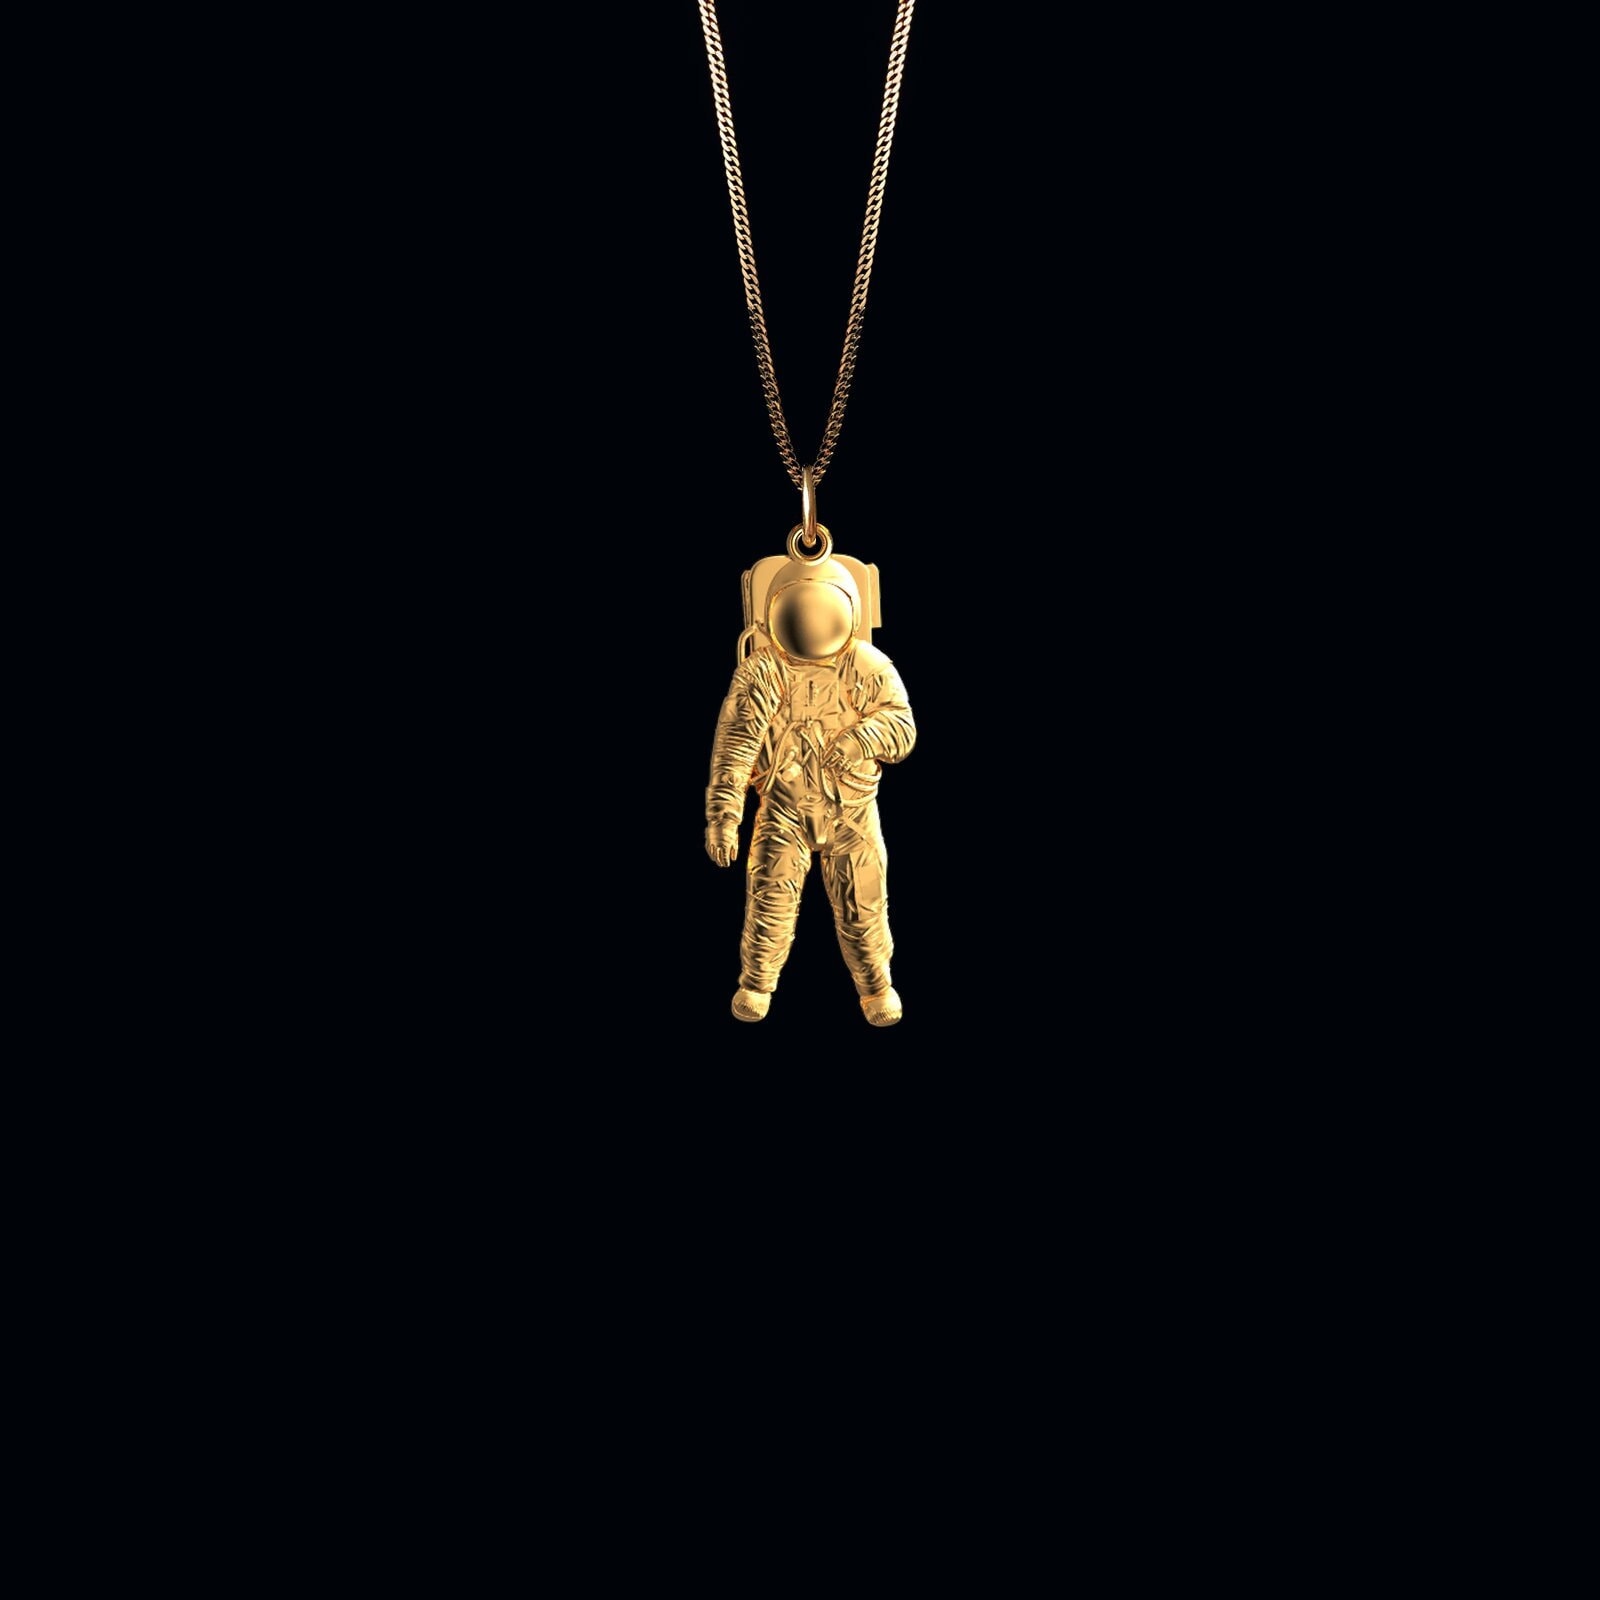 Gold Tone Astronaut Necklace - OPW275